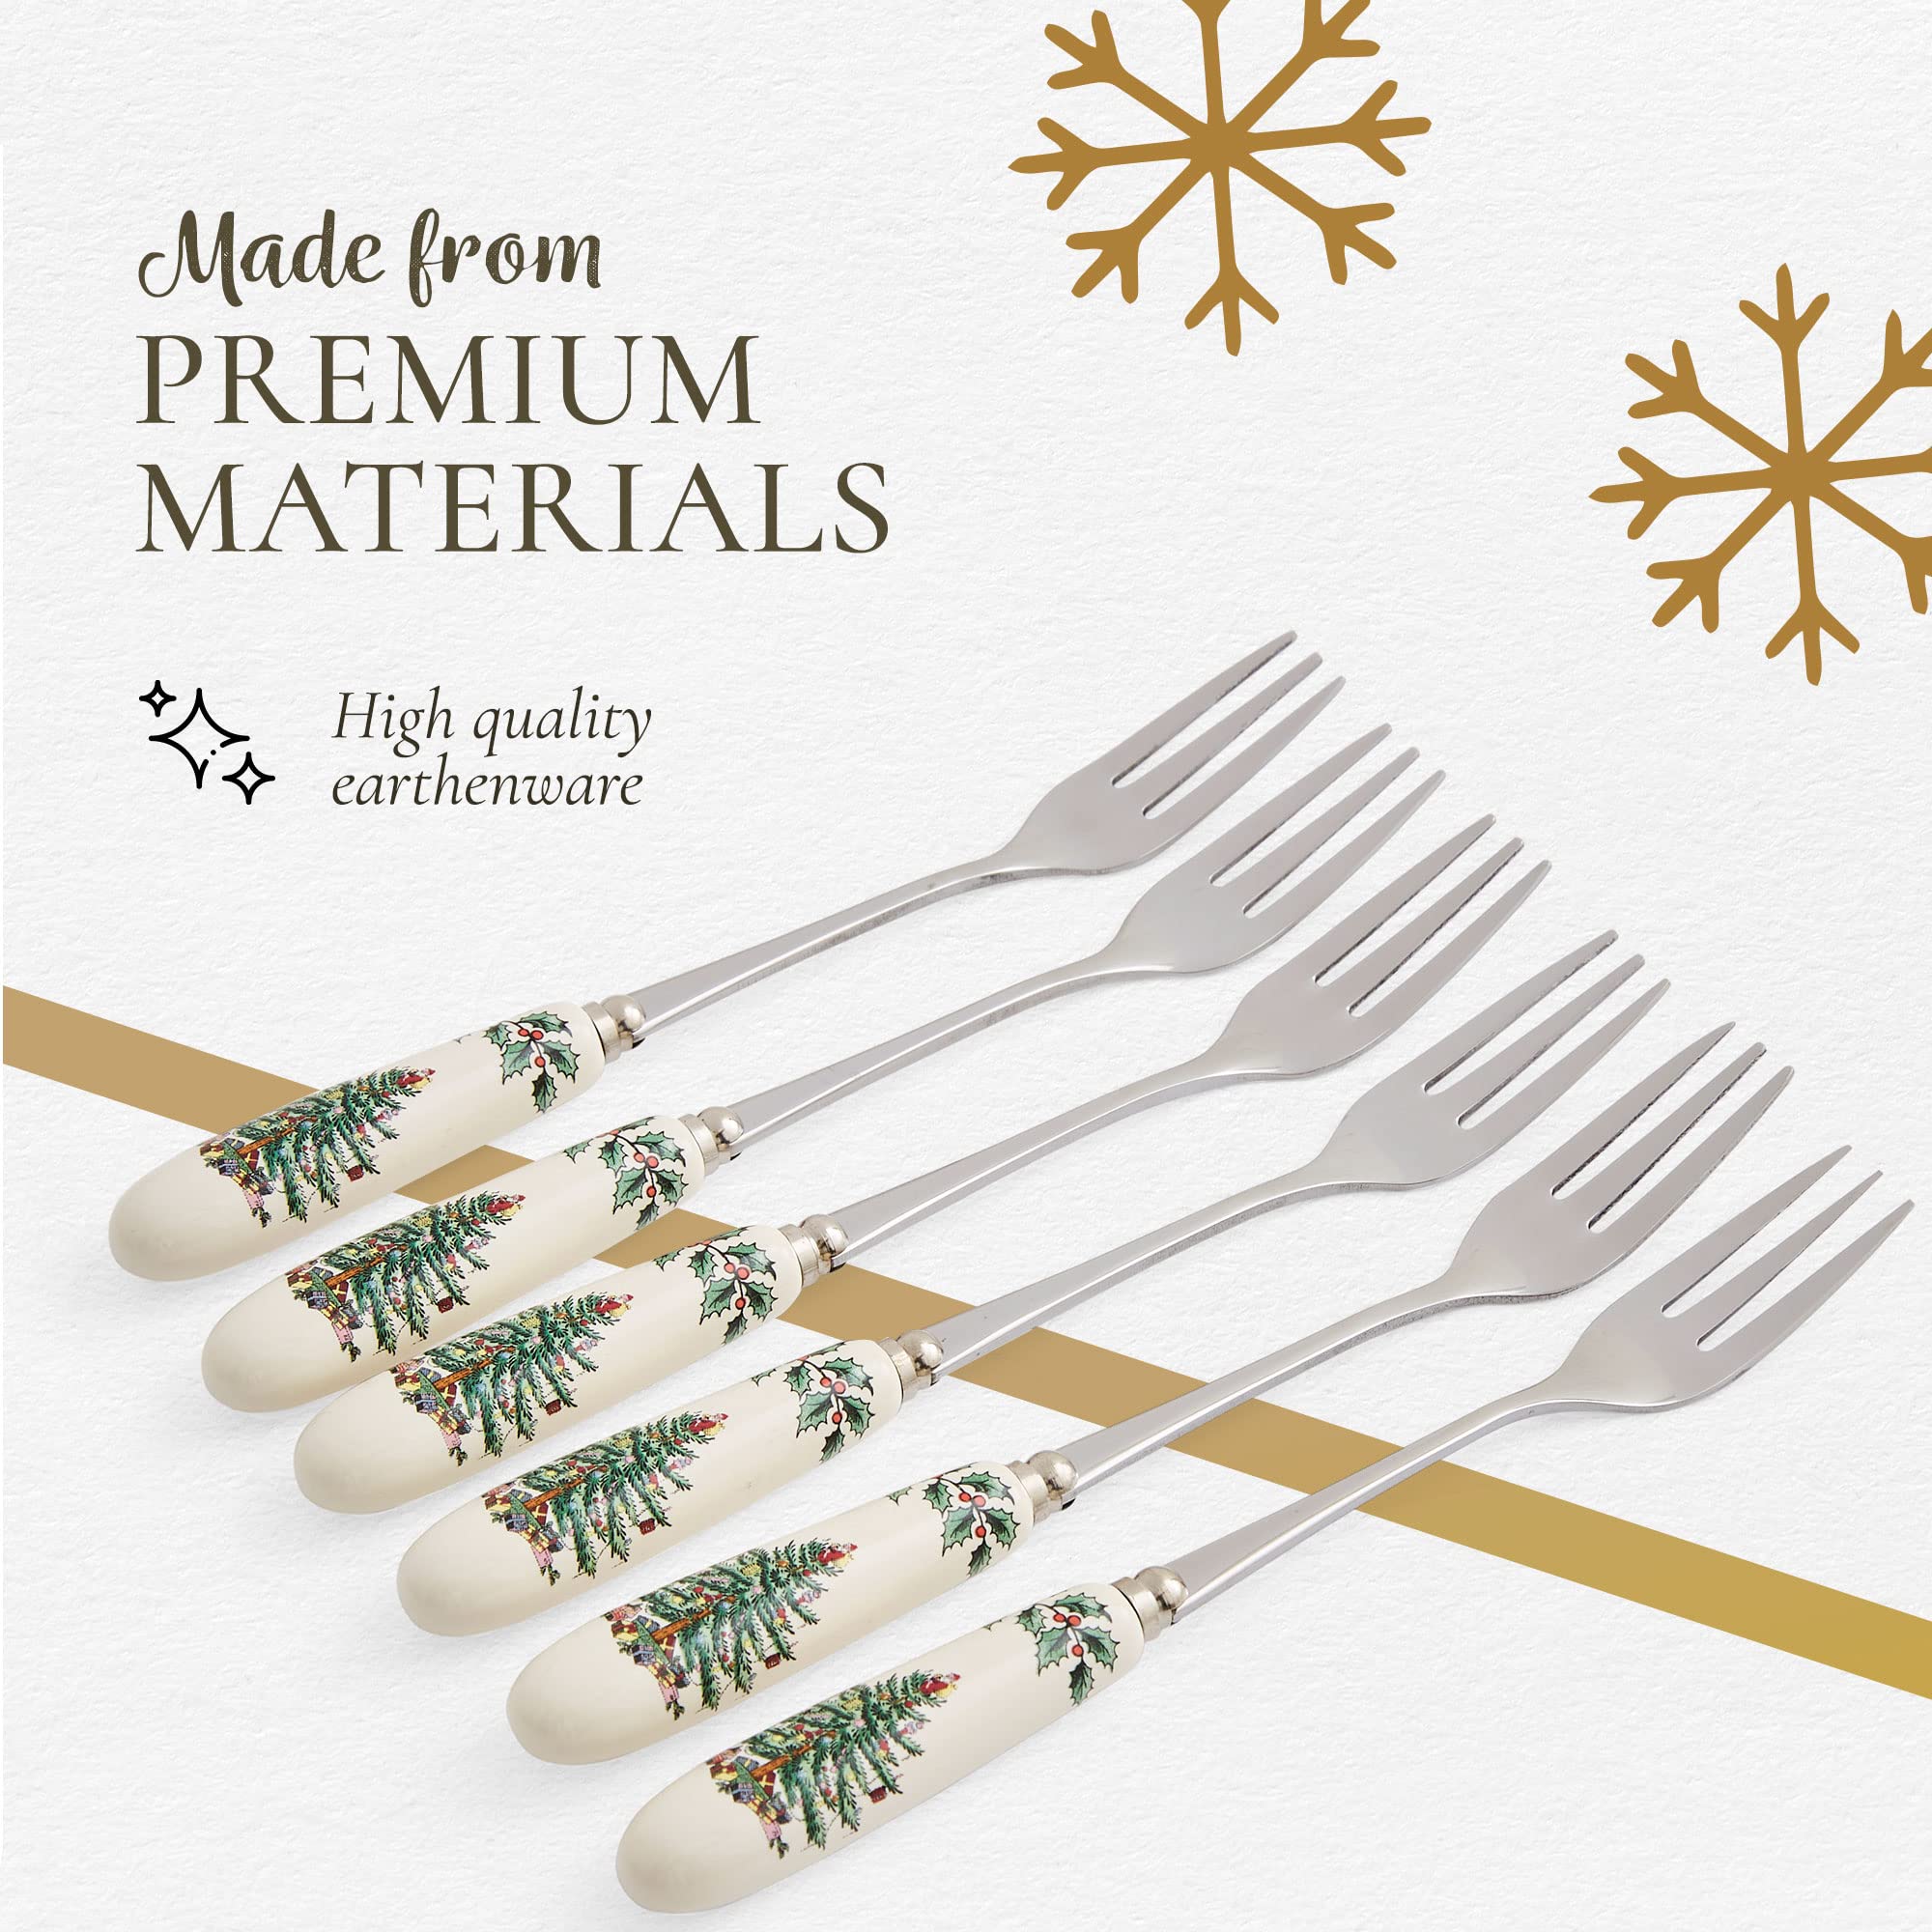 Spode Christmas Tree Collection Pastry Forks, Set of 6, Stainless Steel Fork, Porcelain Handle, 6-Inch Salad, Spaghetti, Appetizer, and Dessert Fork, Holiday Silverware